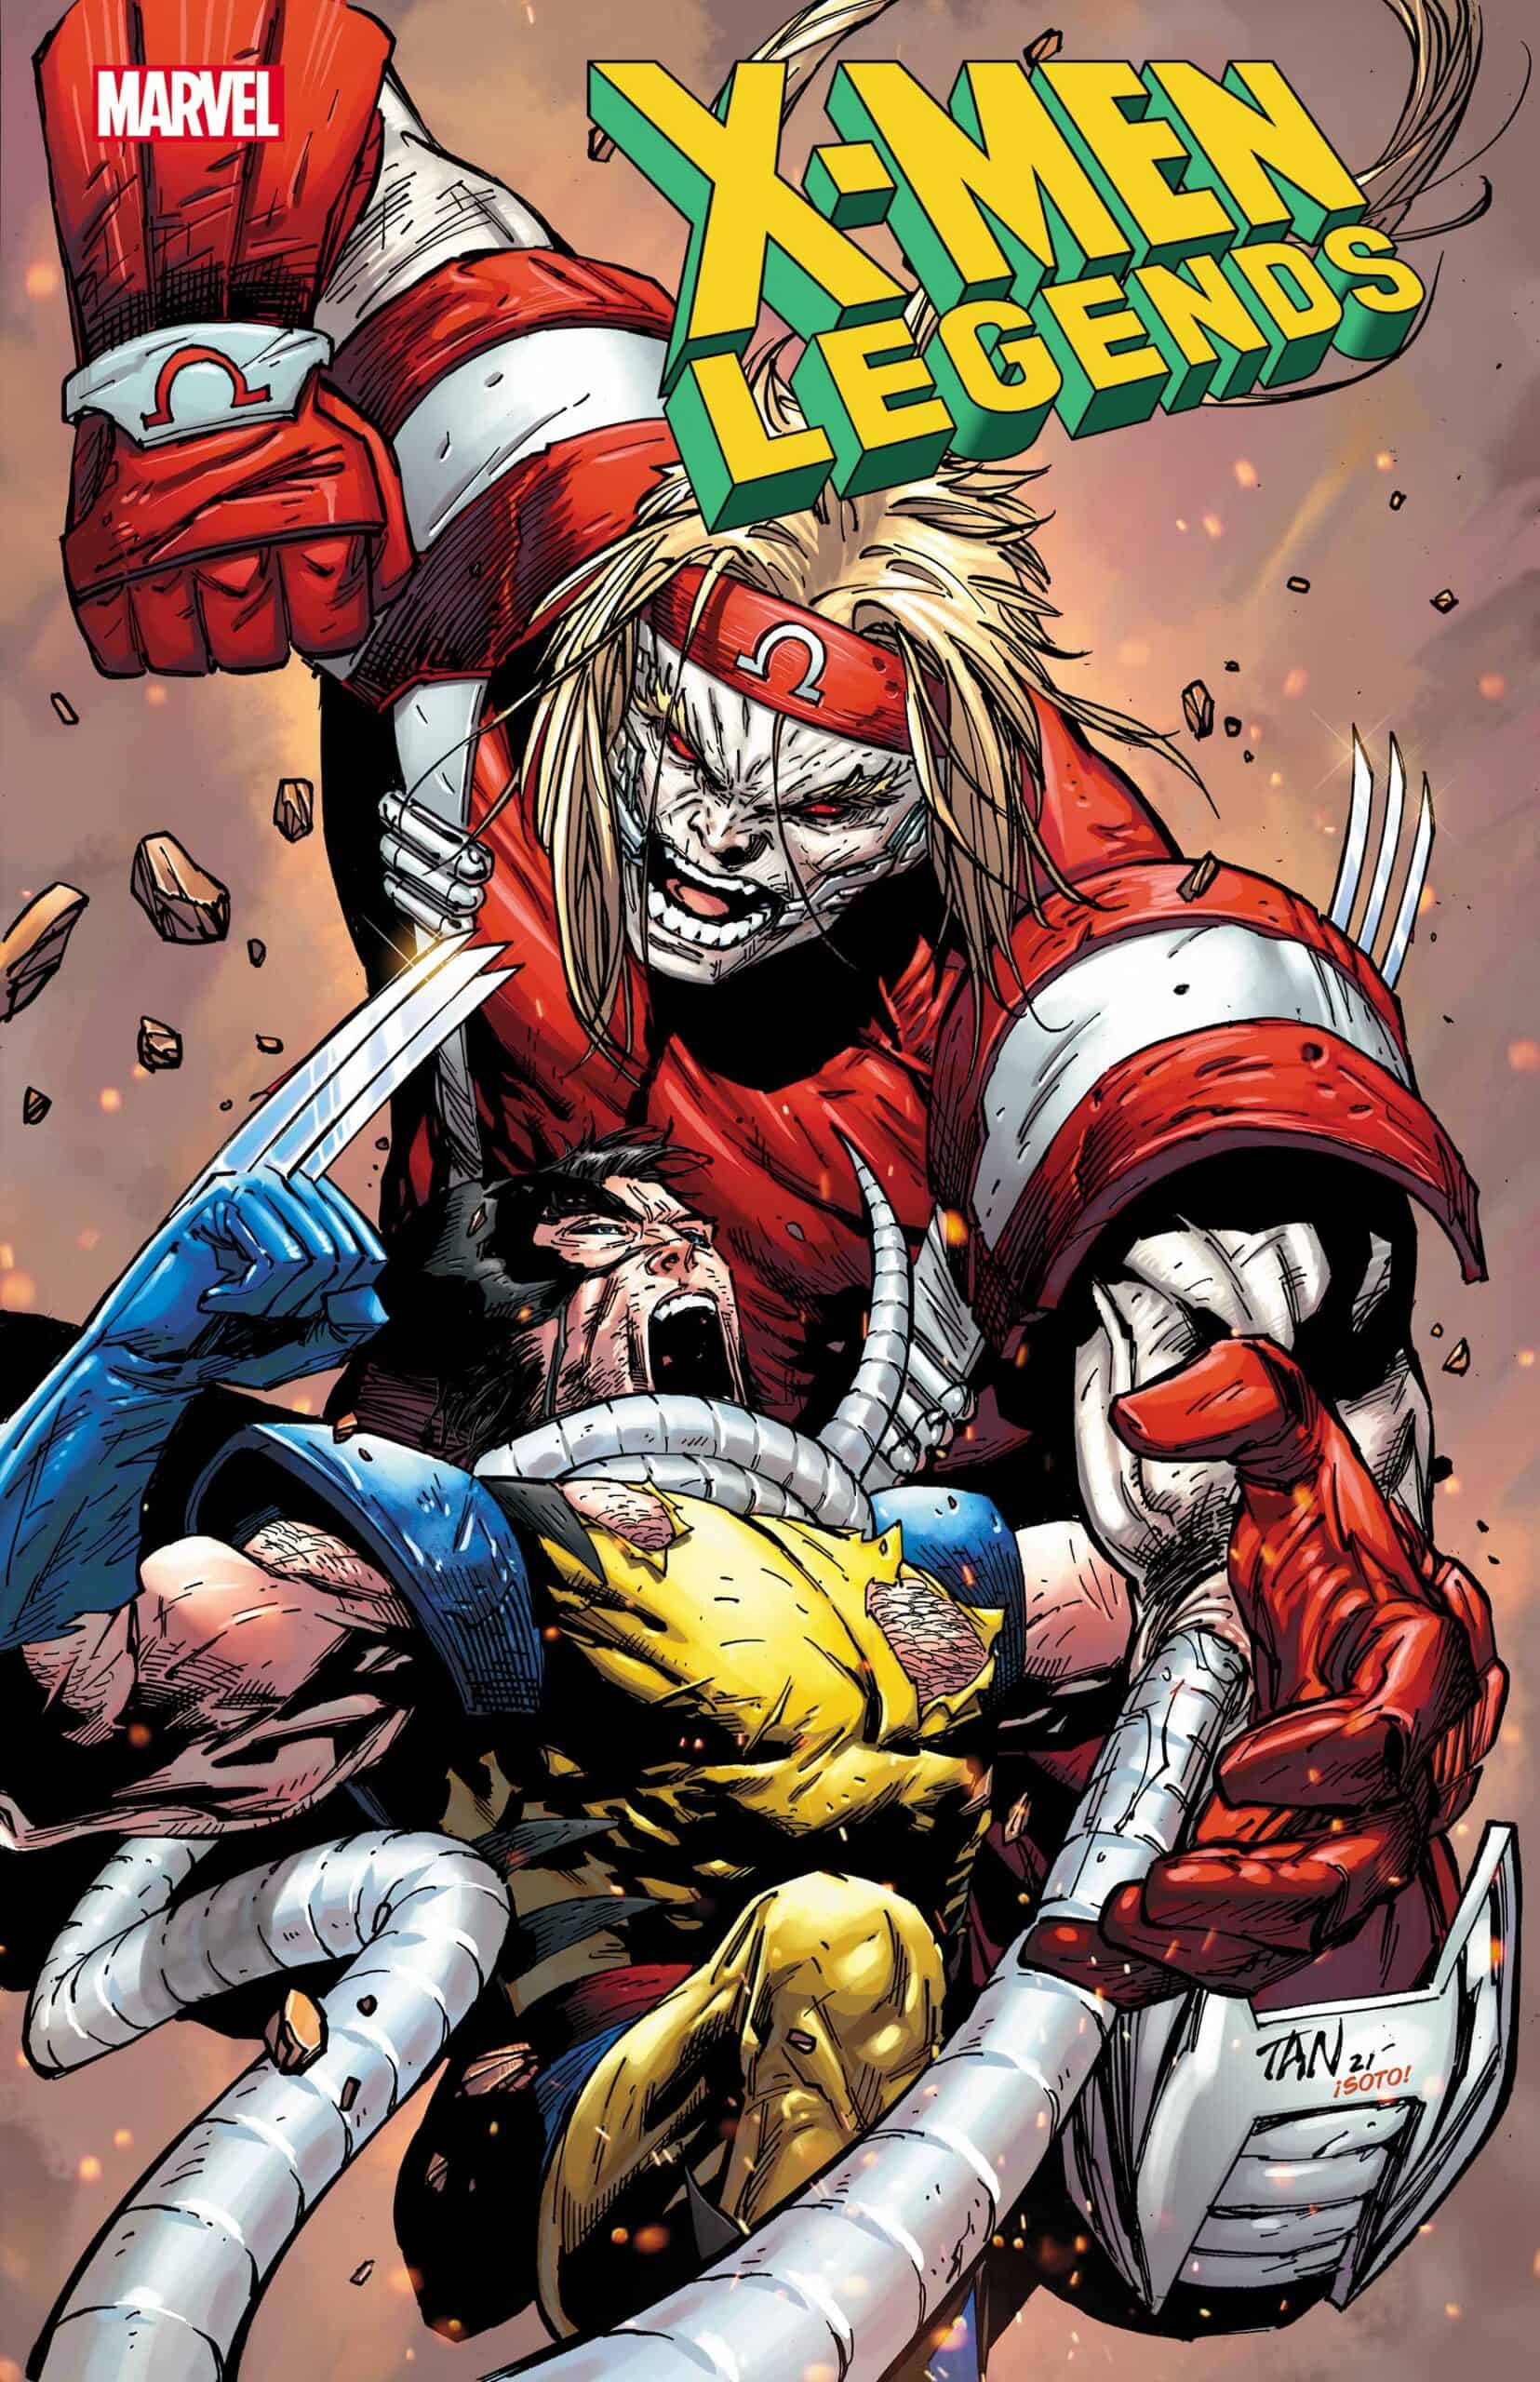 ENTER OMEGA RED! In the EXCLUSIVE First Look at the X-MEN LEGENDS #8 Cover and Solicit - Comic Watch